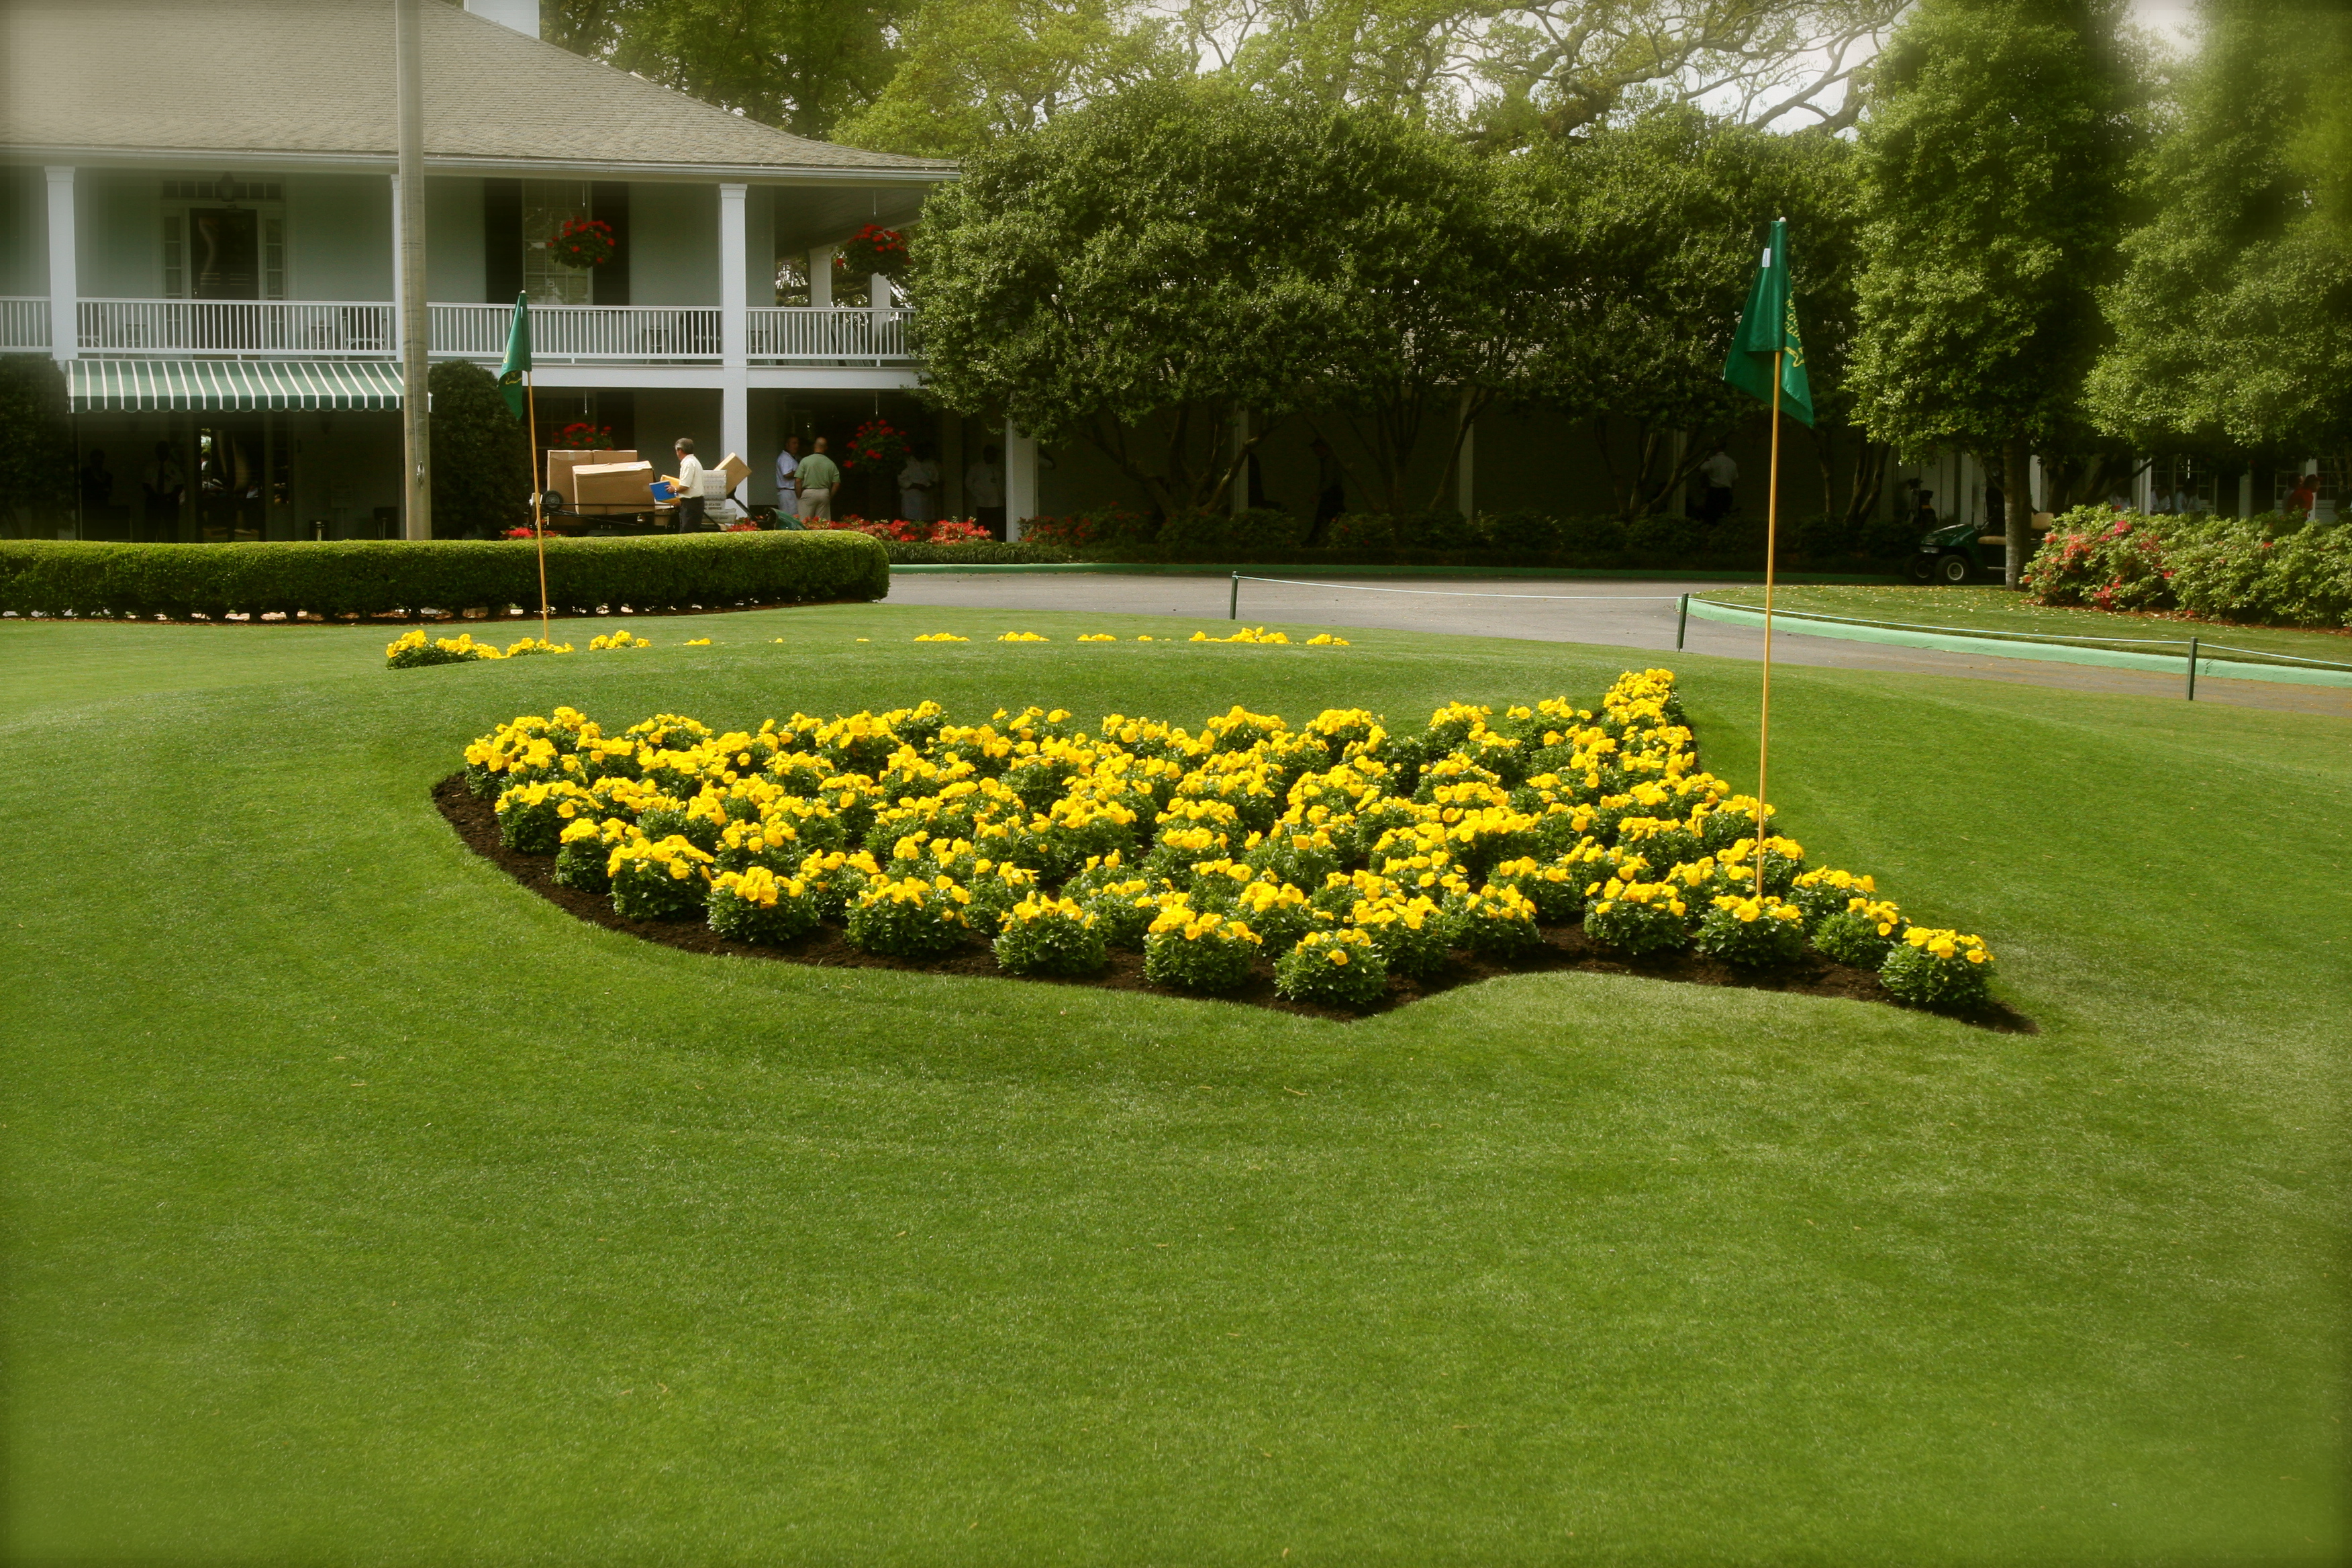 Augusta National staff member takes Arnold Palmer’s iconic green jacket